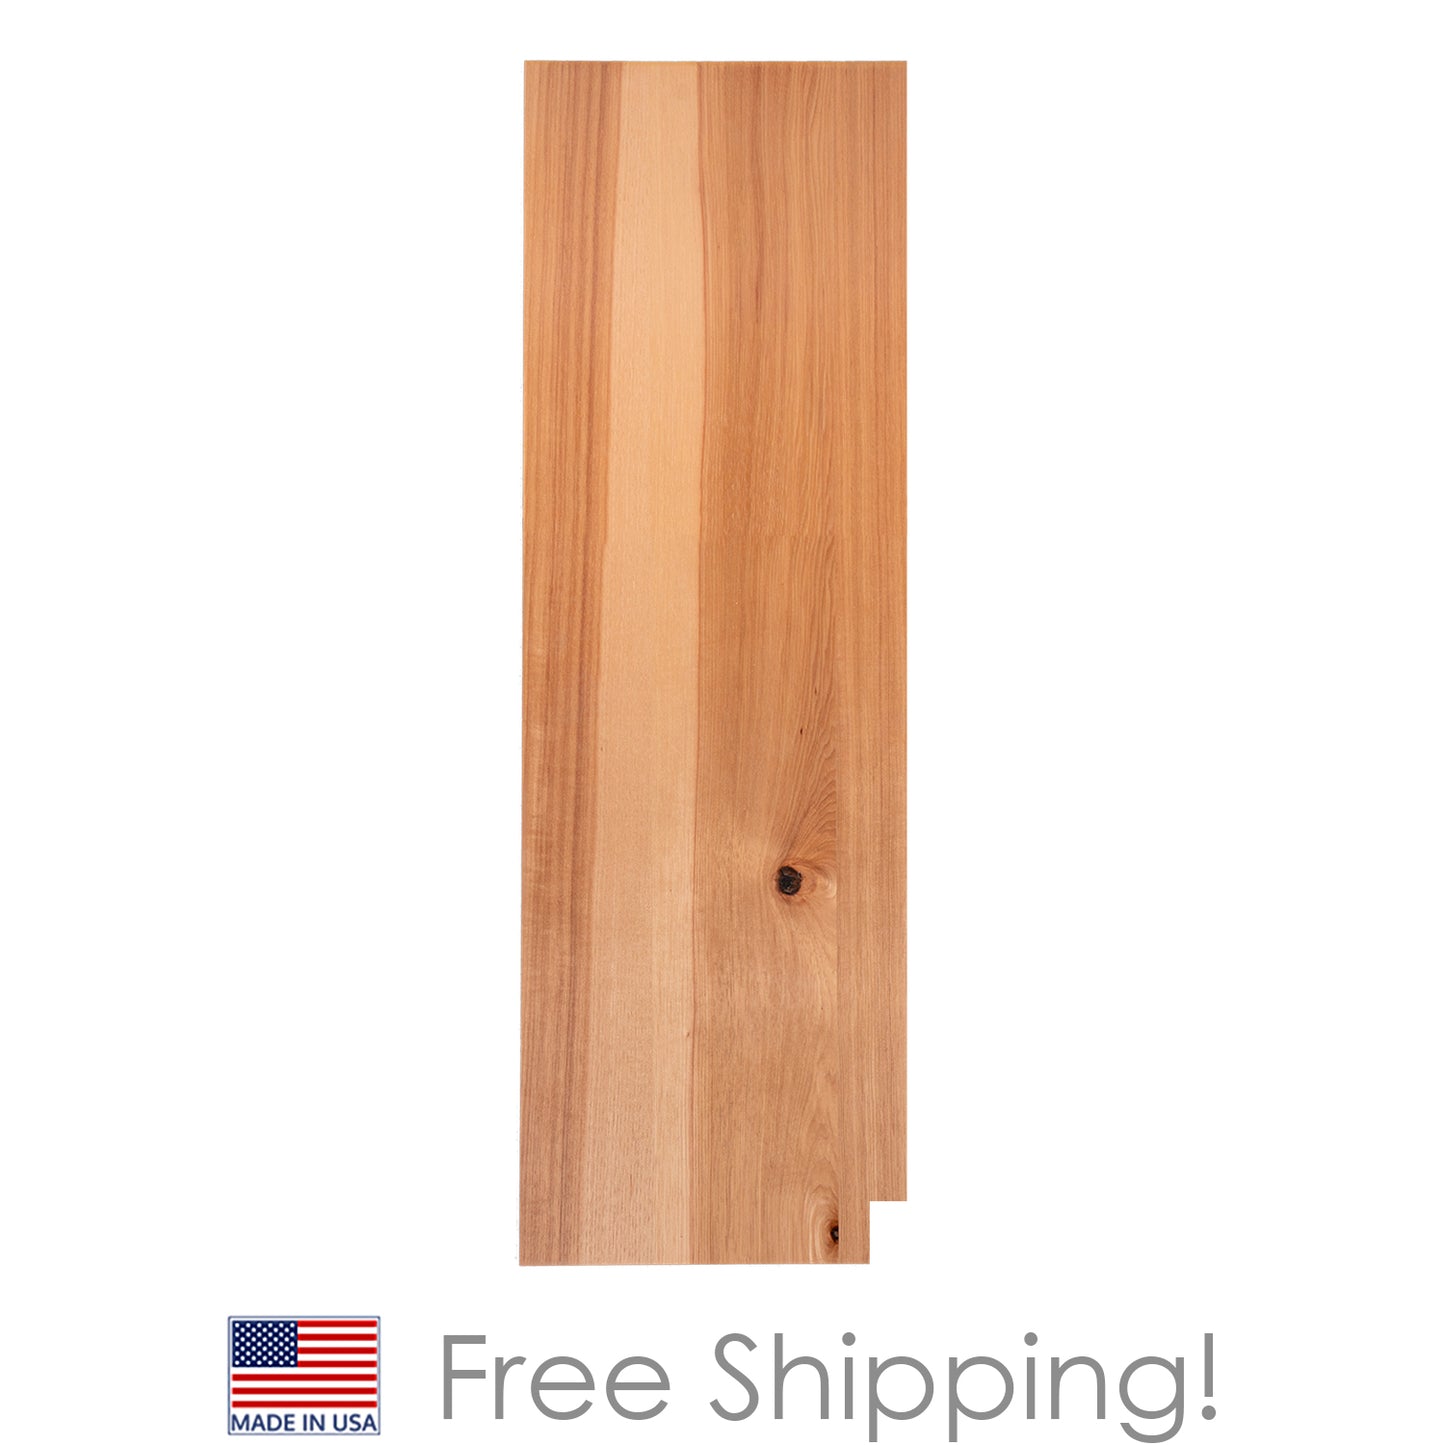 Quicklock RTA (Ready-to-Assemble) Rustic Hickory .25"X23.25"X84" Pantry End Panel - Left Side